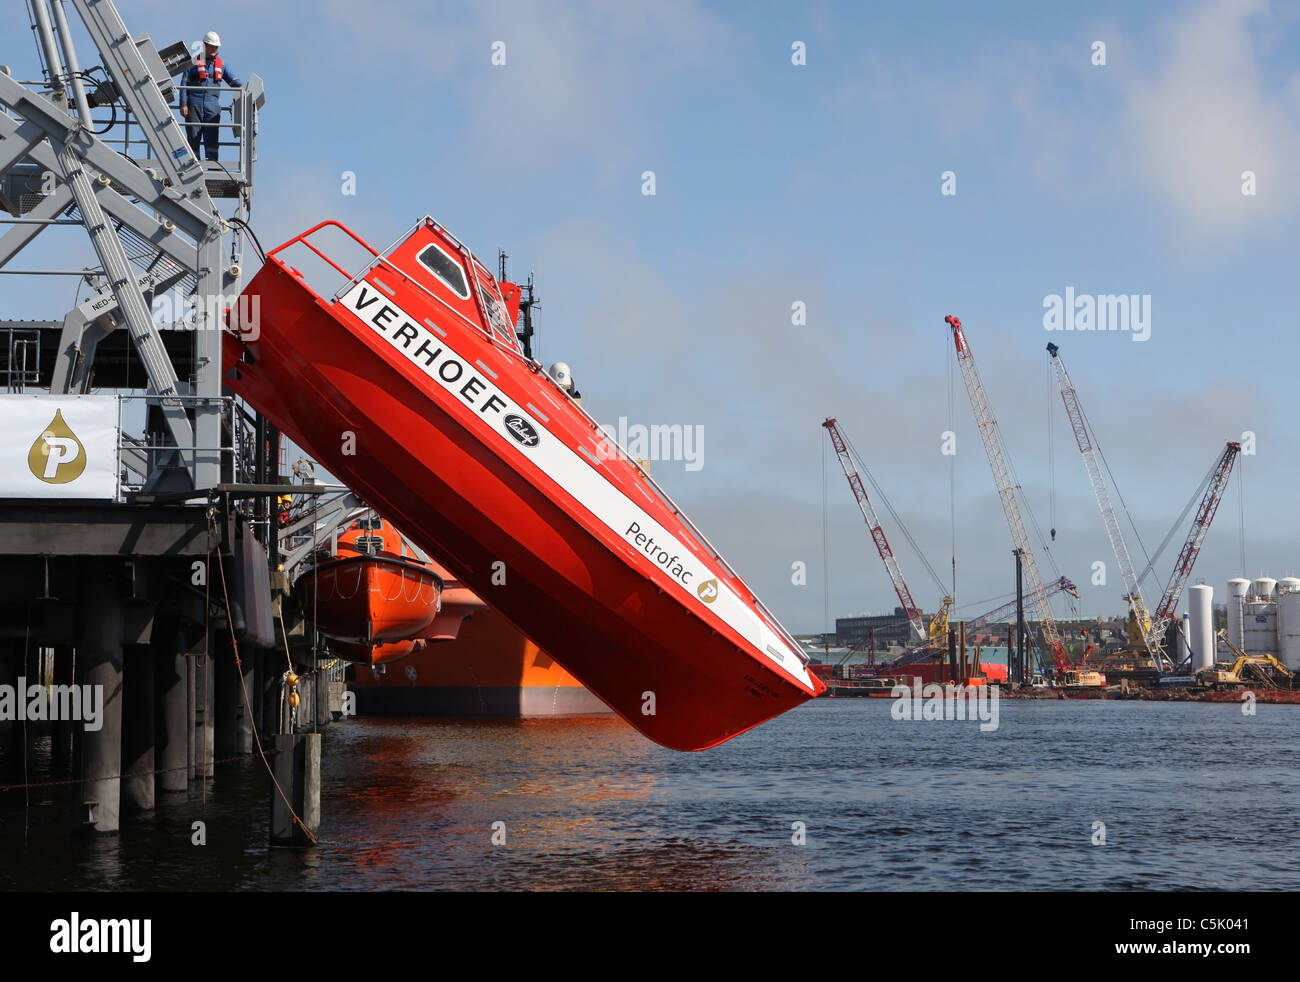 Sequence (see other images) of a free fall lifeboat trainer being dropped into the water. Stock Photo